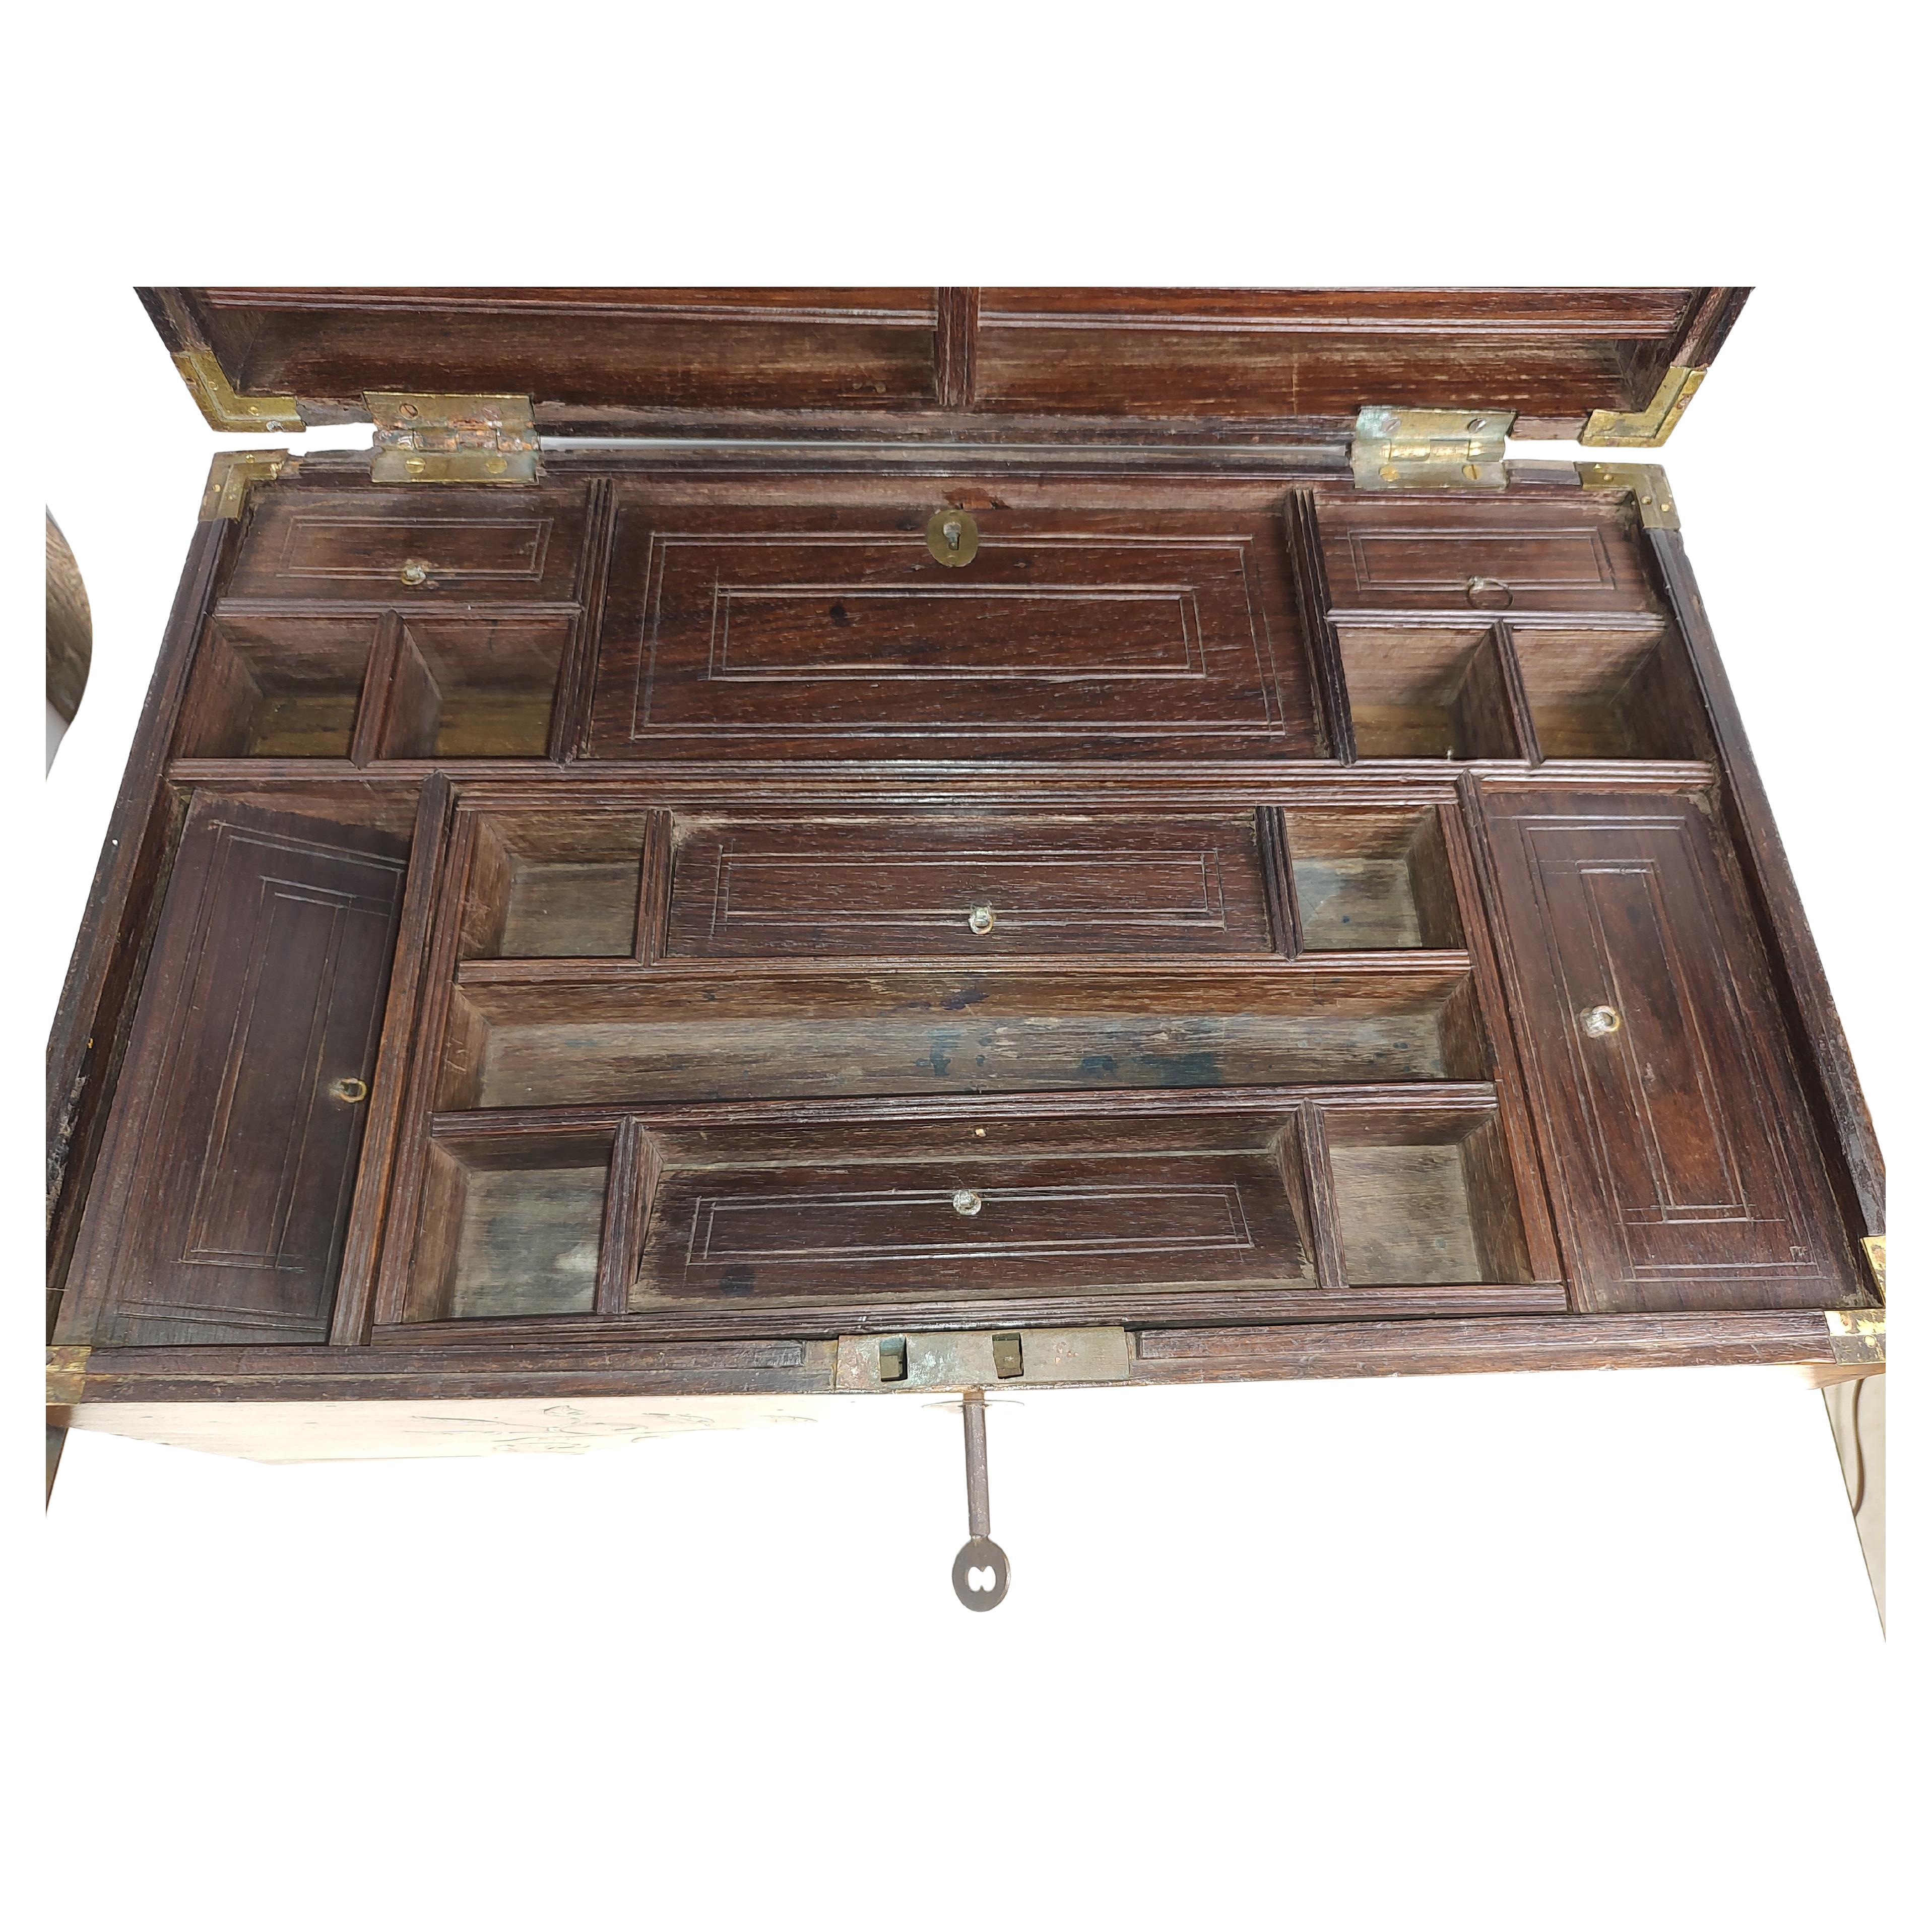 Hand-Crafted 19thC Campaign Style Rosewood with Brass Inlay Stationary Letter Box For Sale